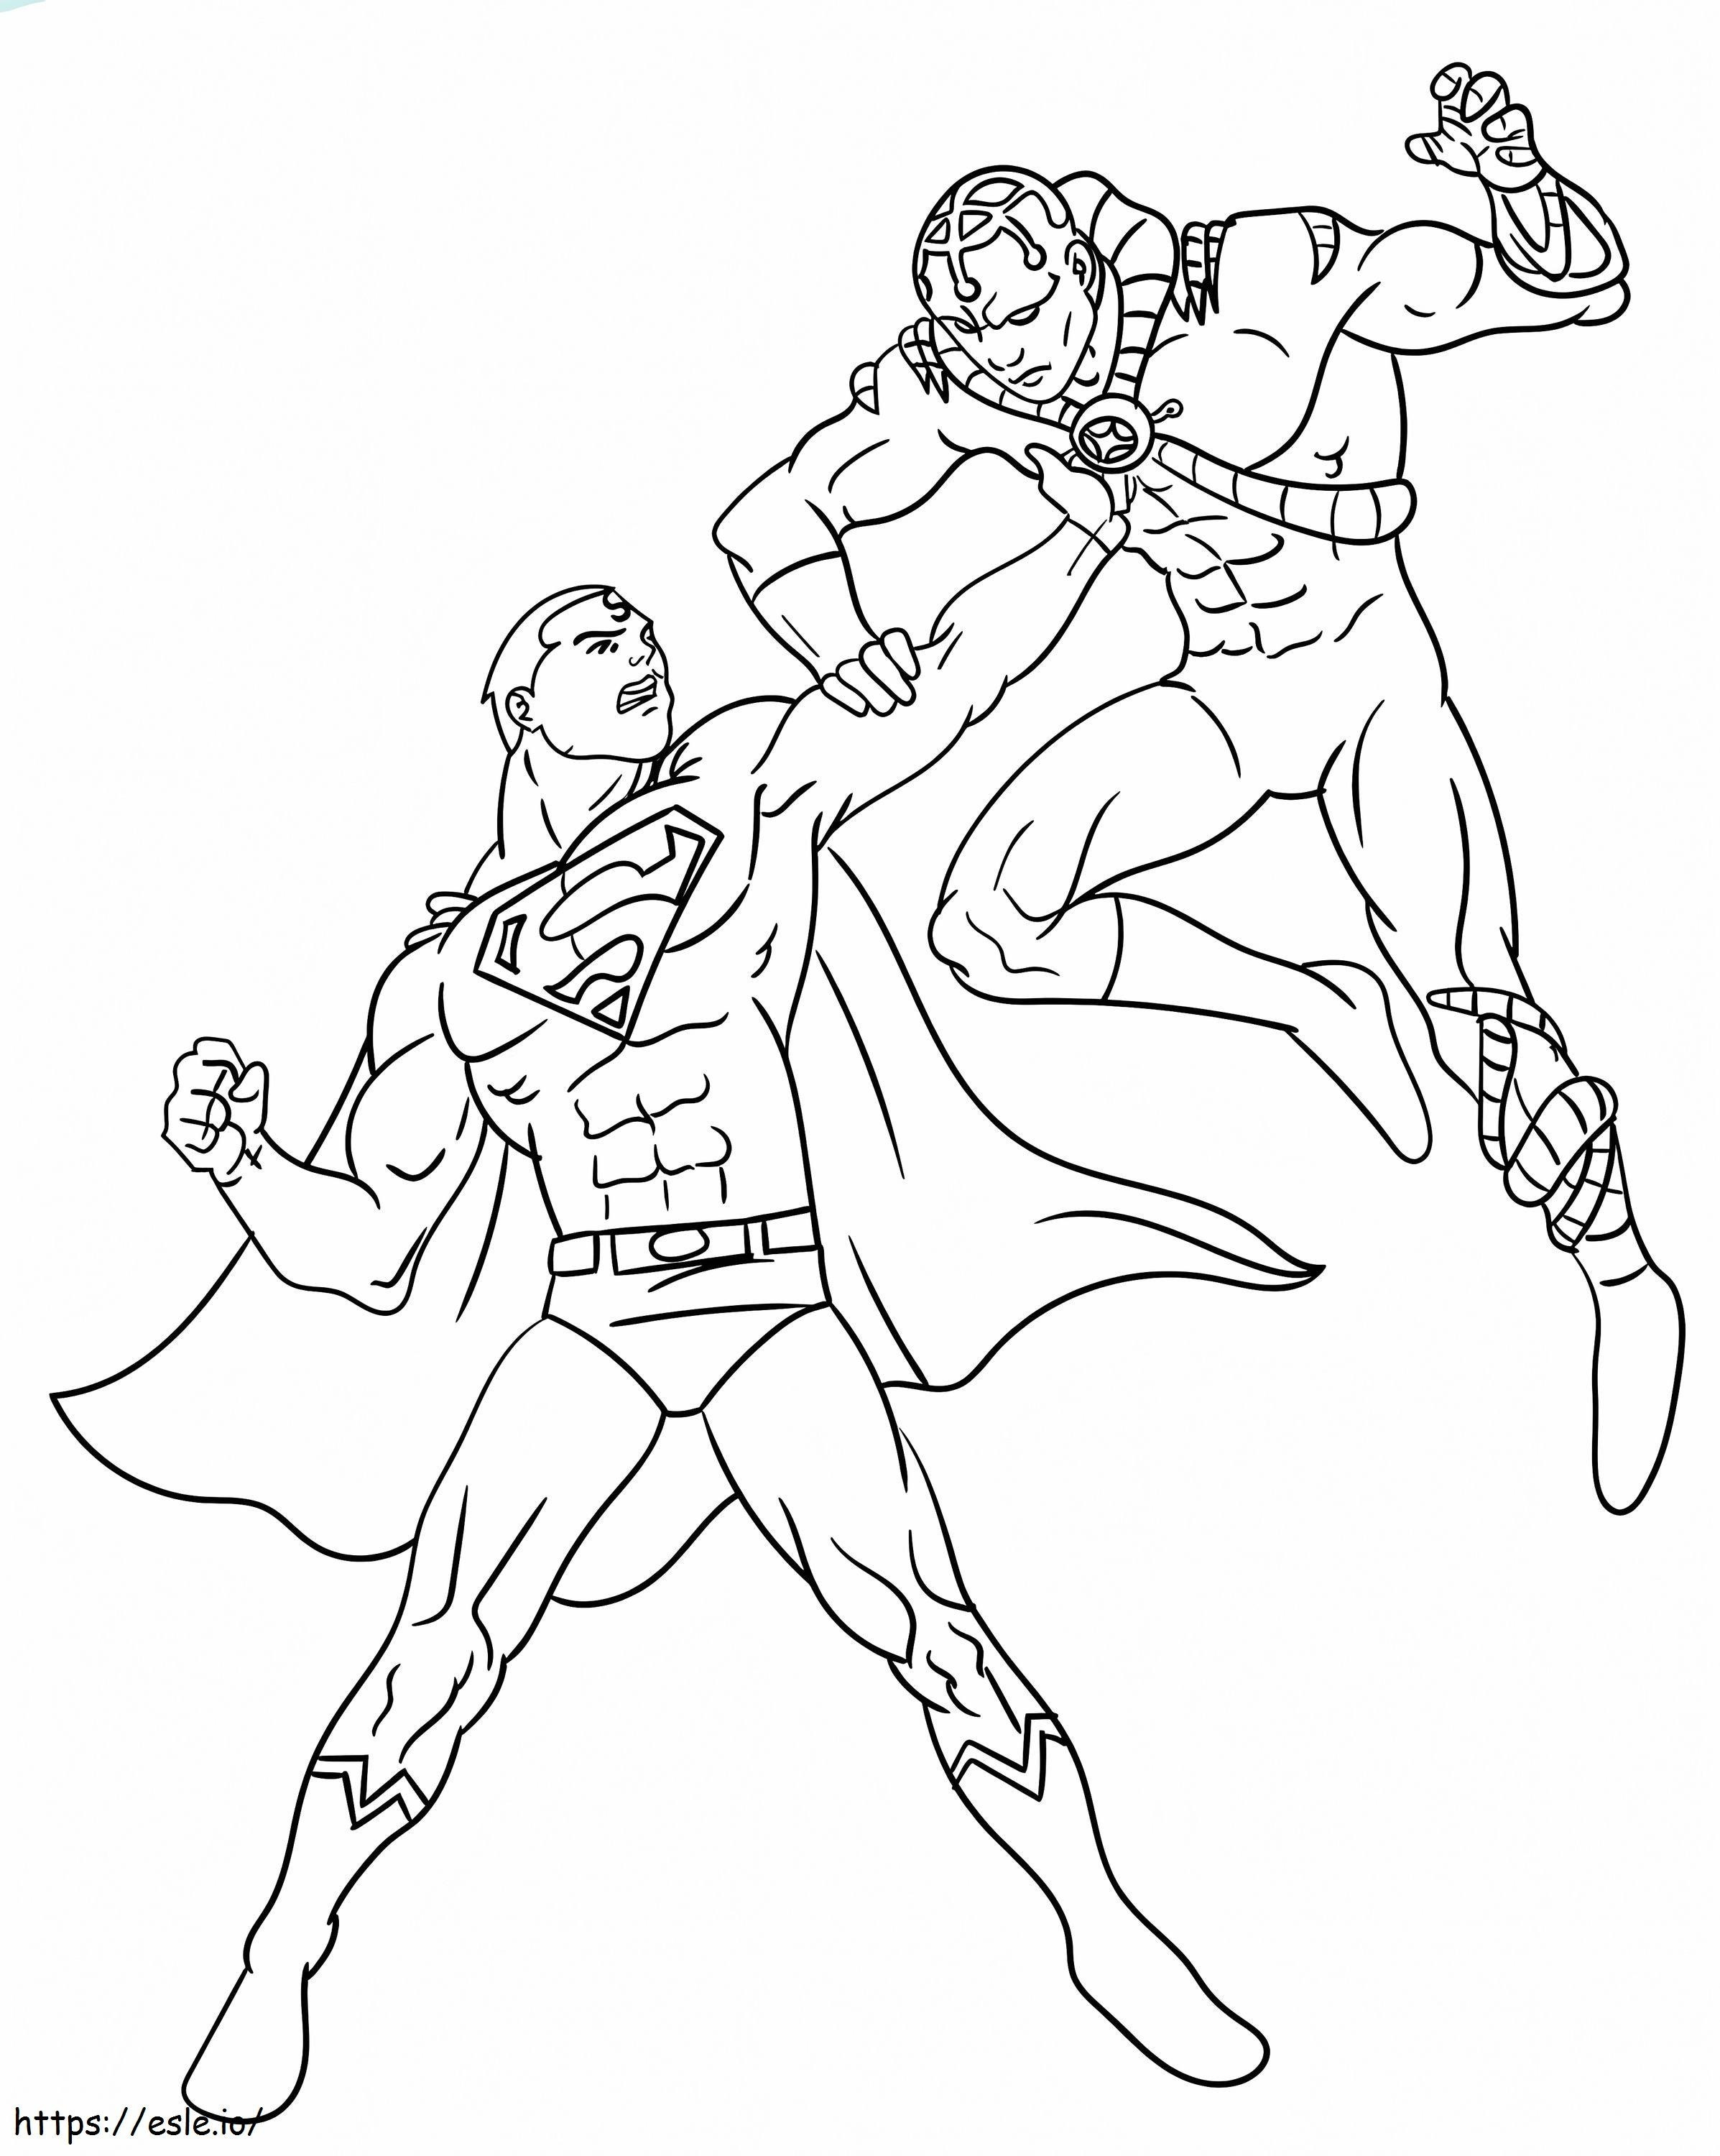 Superman Fights Enemy coloring page